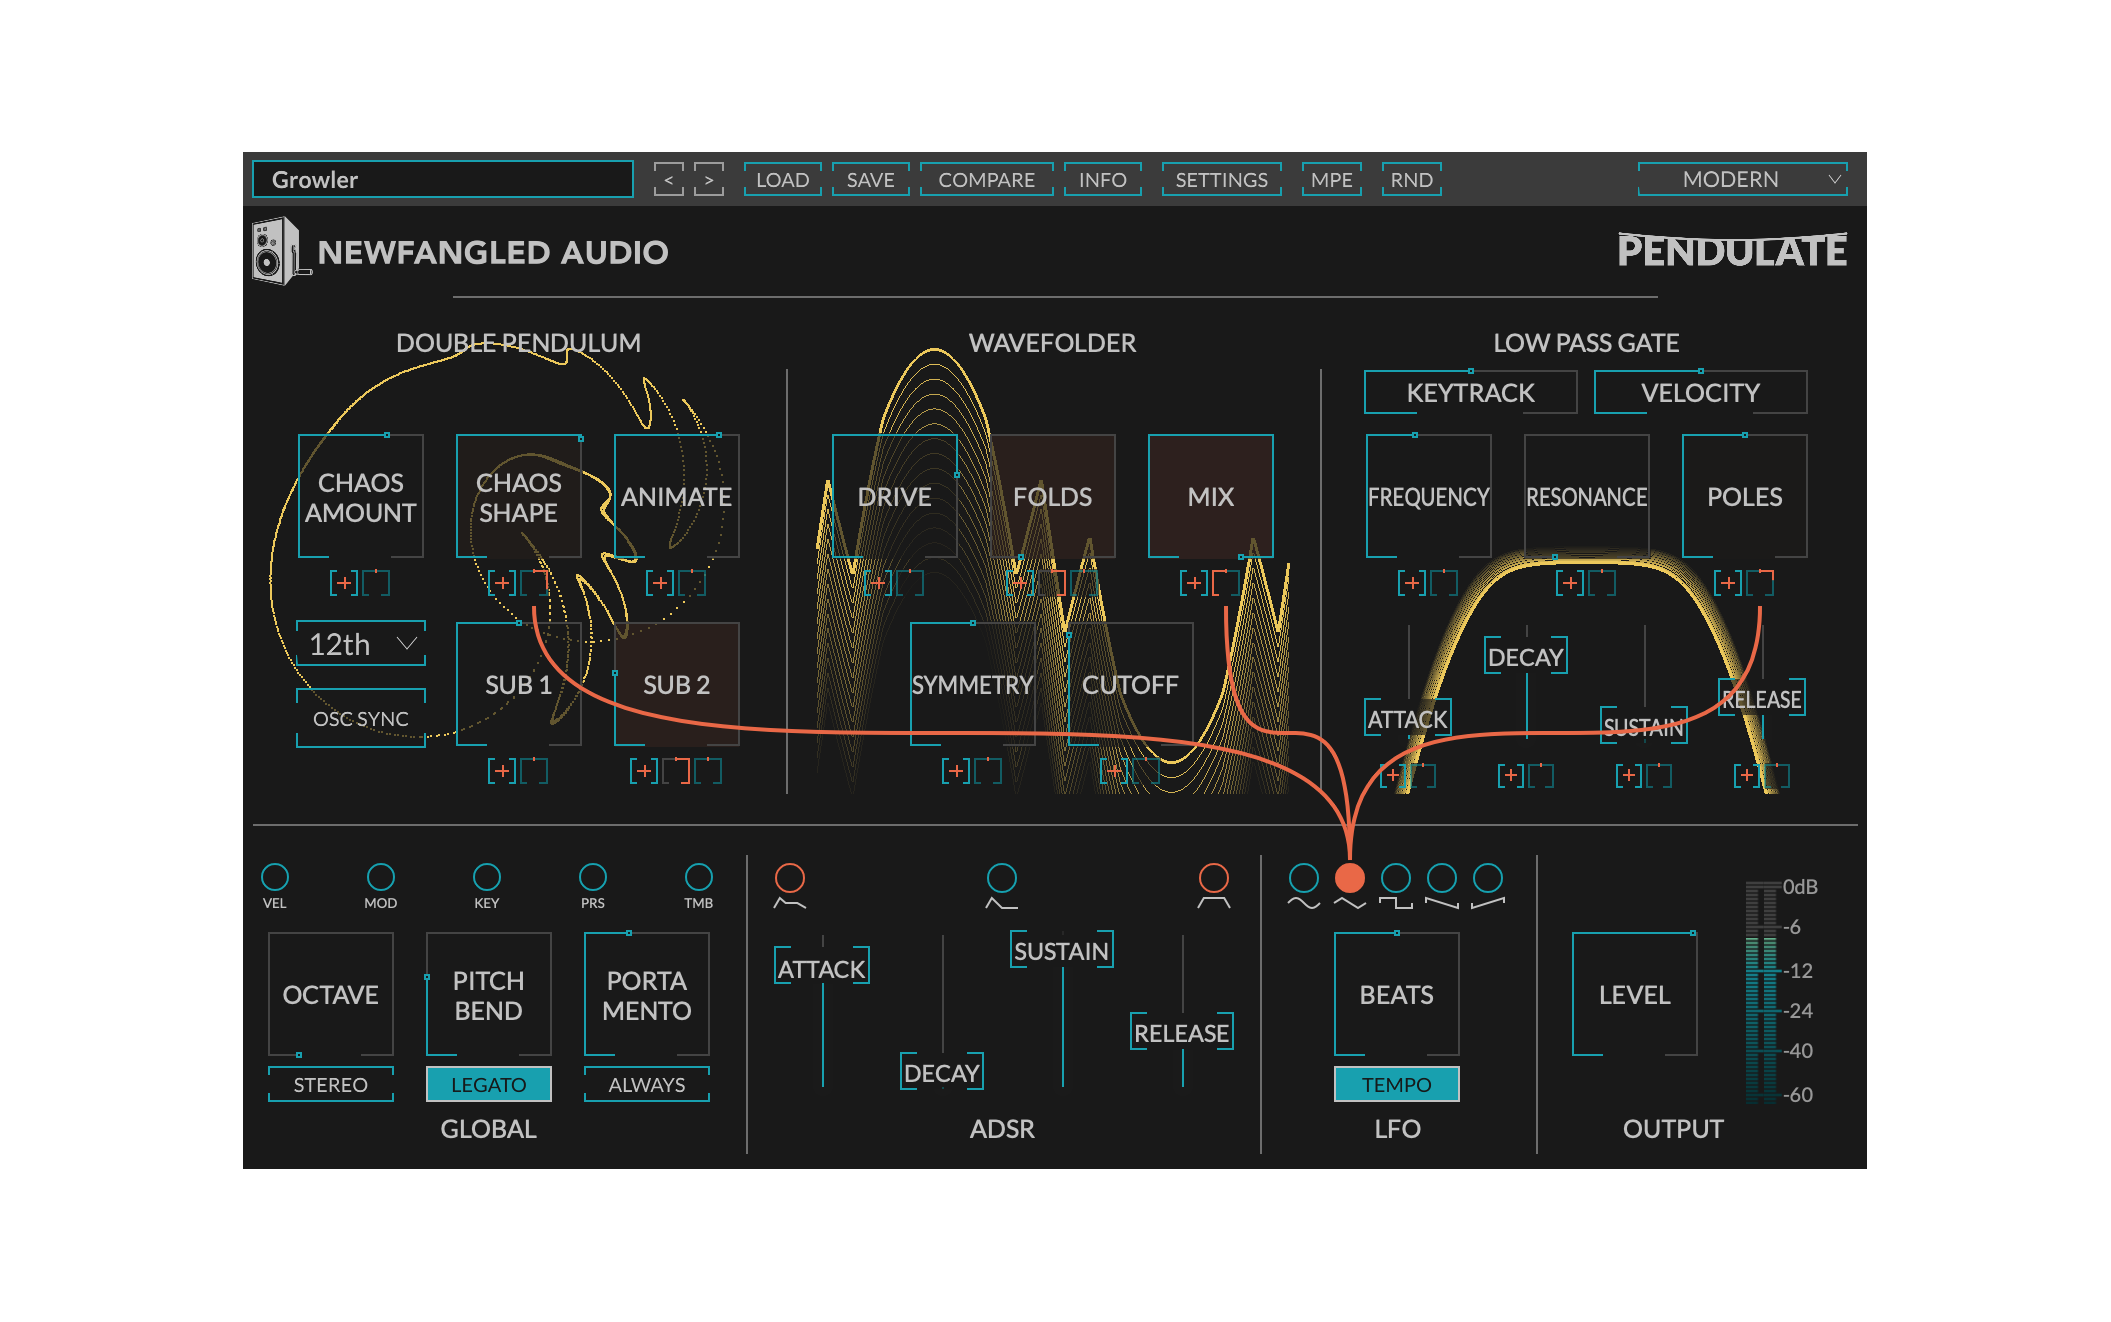 This “chaotic monosynth” packed with incredible possibilities is yours for free